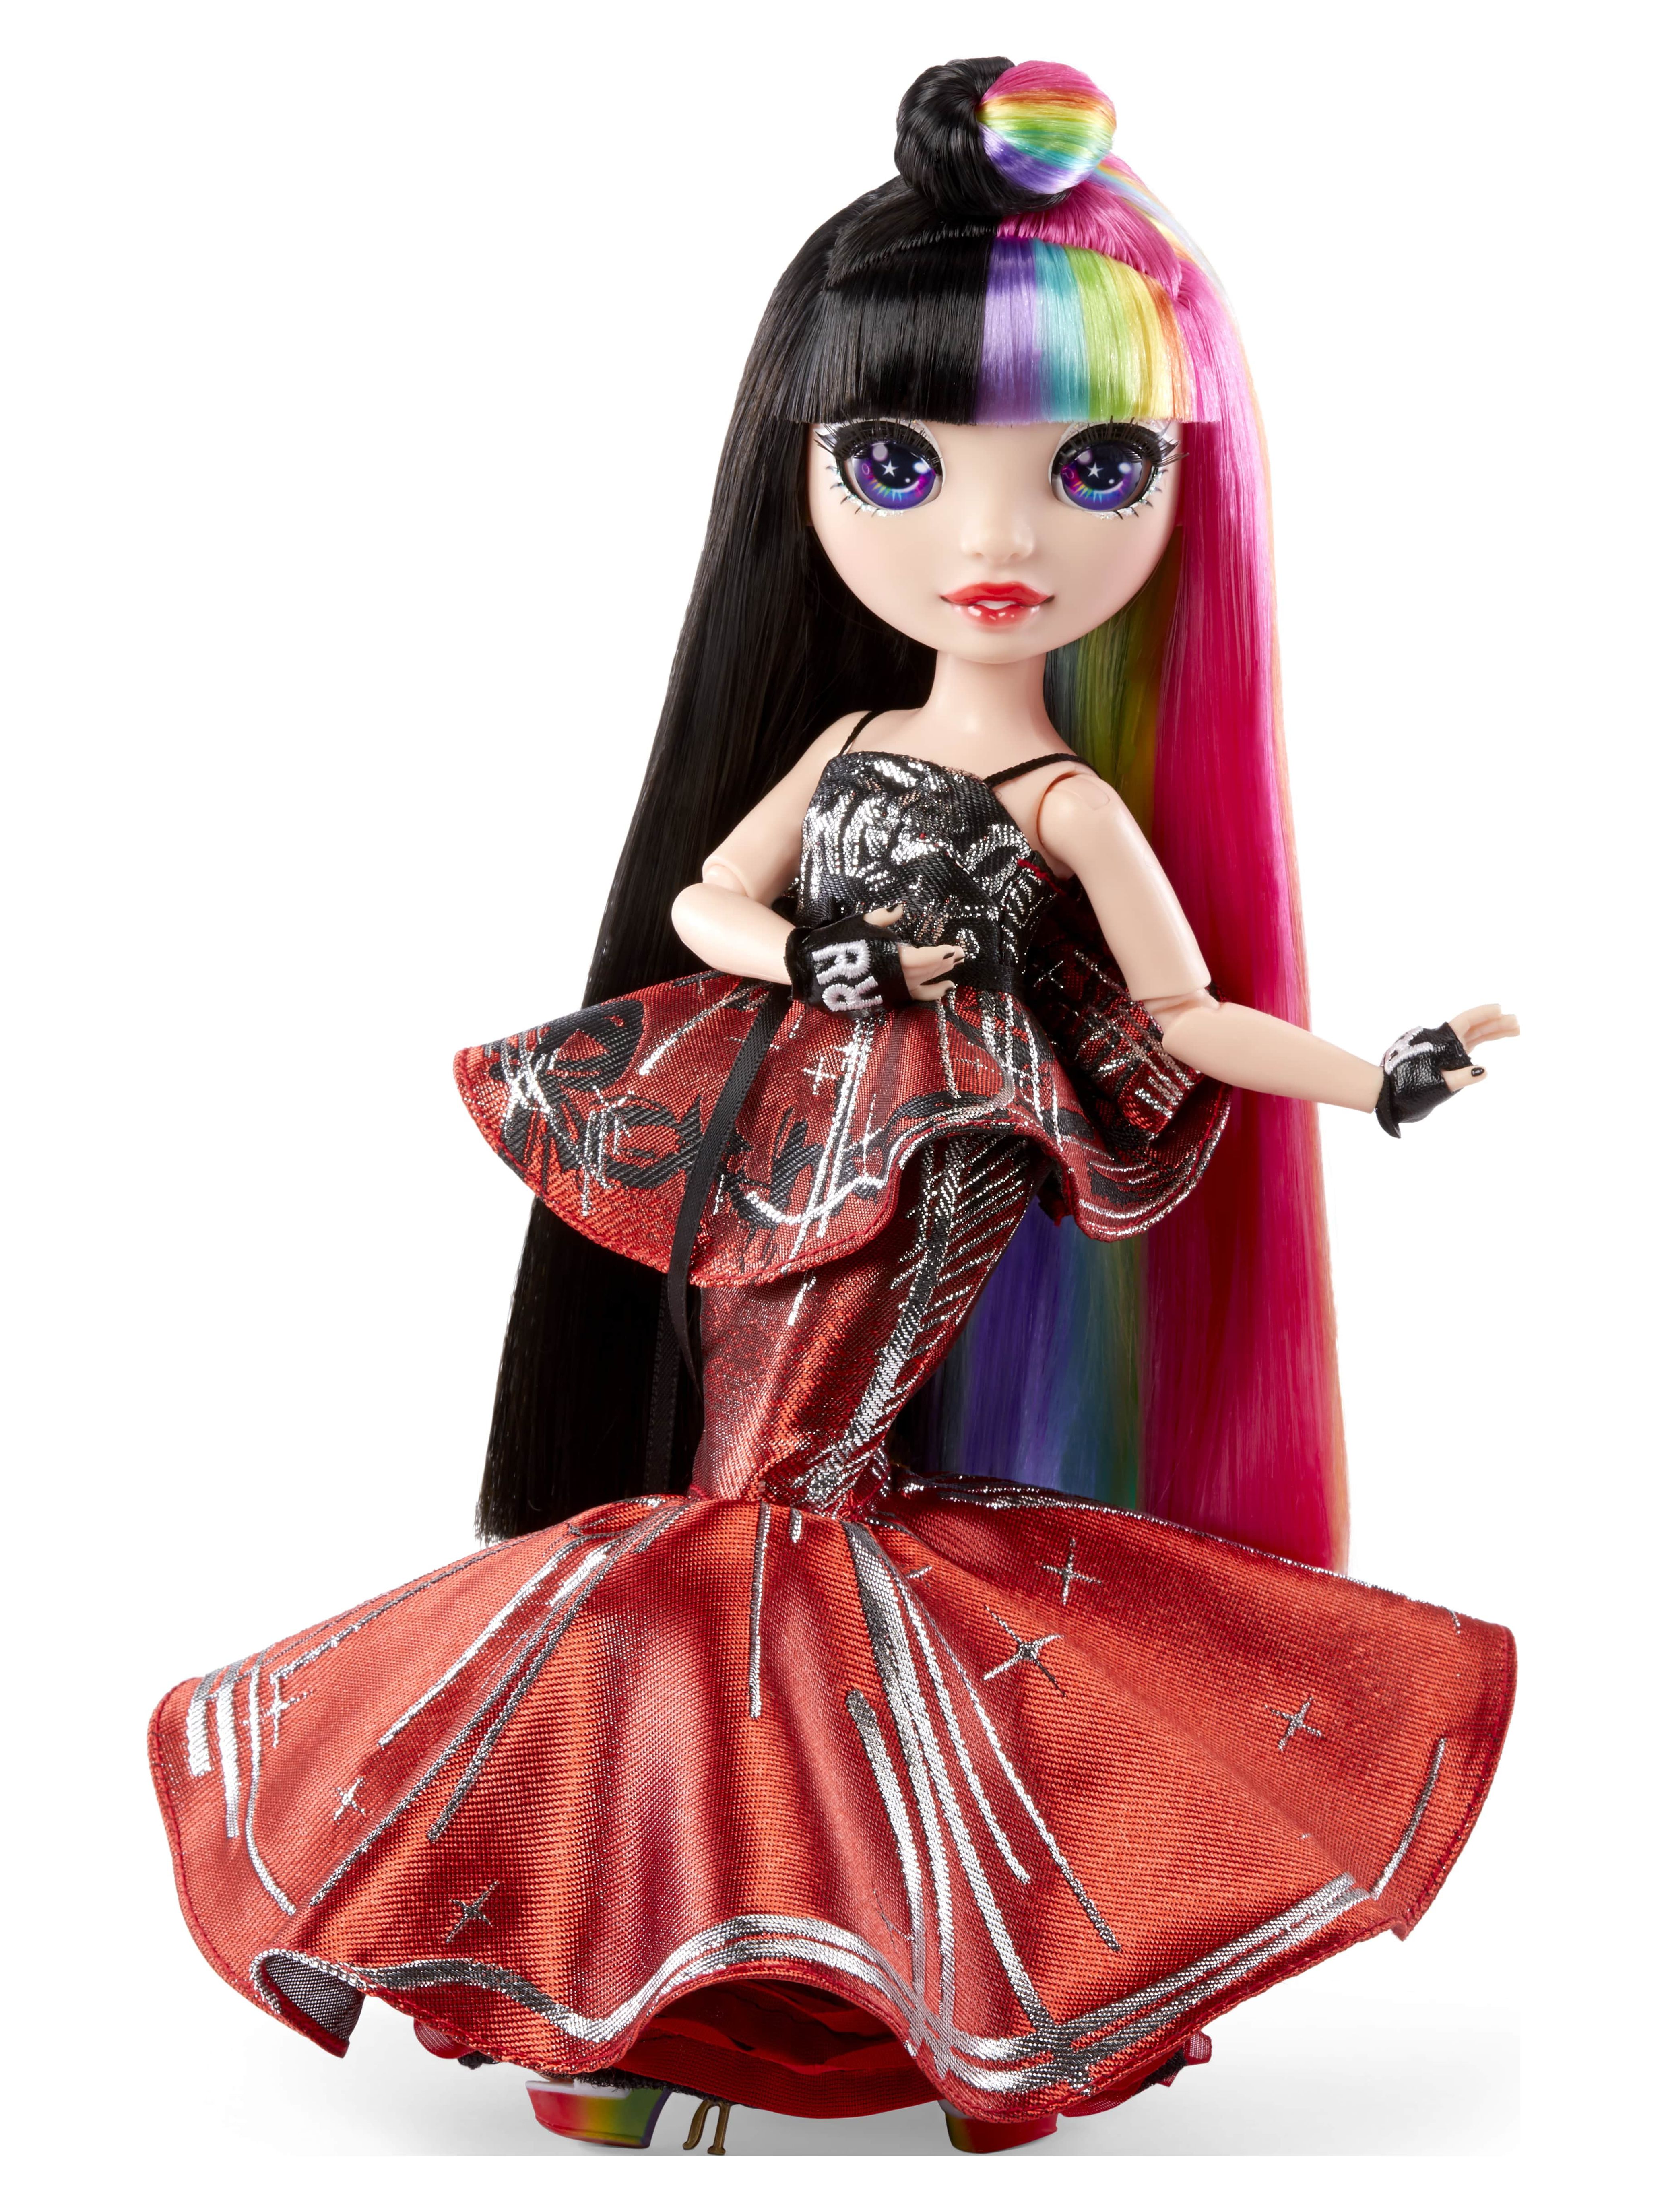 Rainbow High 2021 Collector Doll Jett Dawson with Black And Multicolored Rainbow Hair, 11 inch Es, 2 Mix & Match Outfits, Premium Doll Accessories, Collectors Gift, for Girls Ages 6-12+ - image 1 of 8